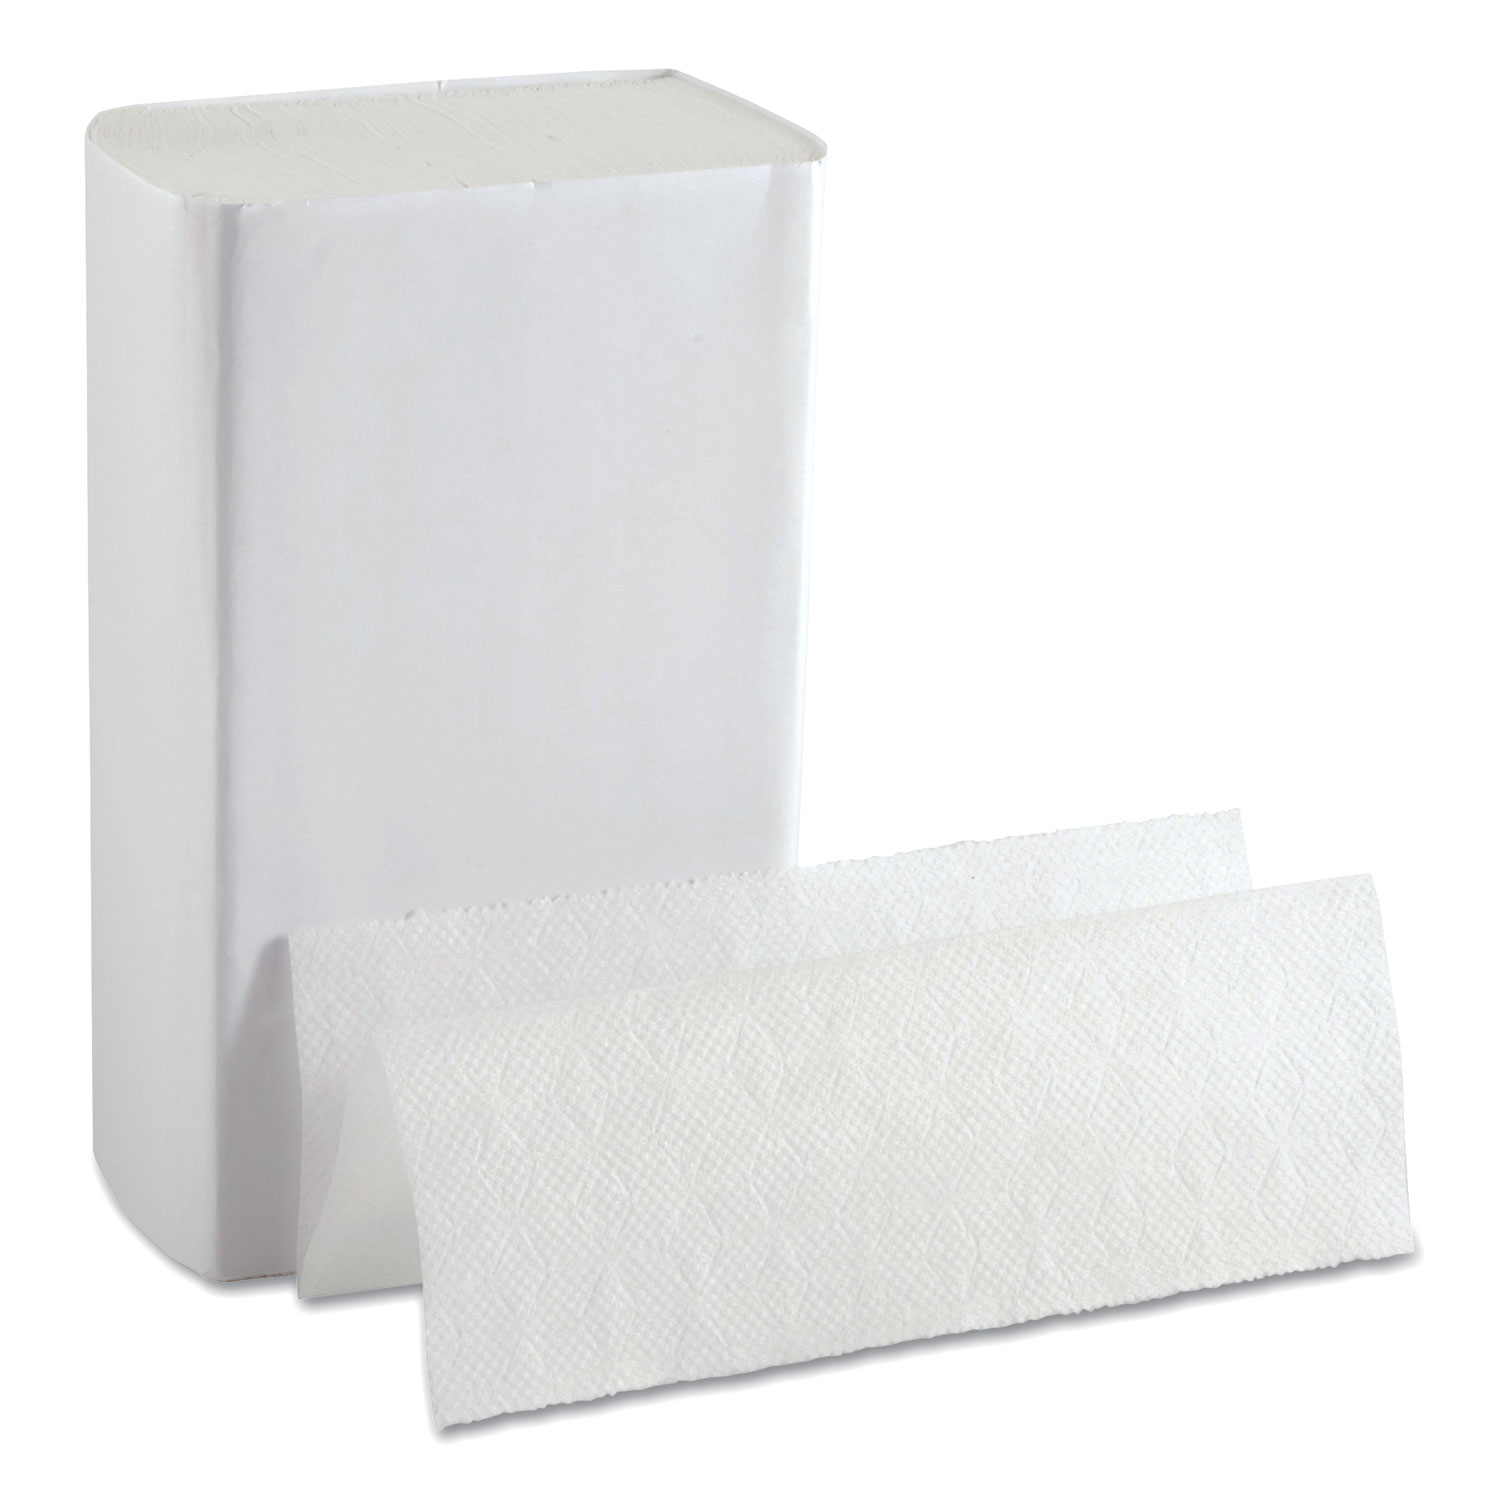  Georgia Pacific Professional 33587 Pacific Blue Ultra Paper Towels, 10 1/5 x 10 4/5, White, 220/Pack, 10 Packs/CT (GPC33587) 